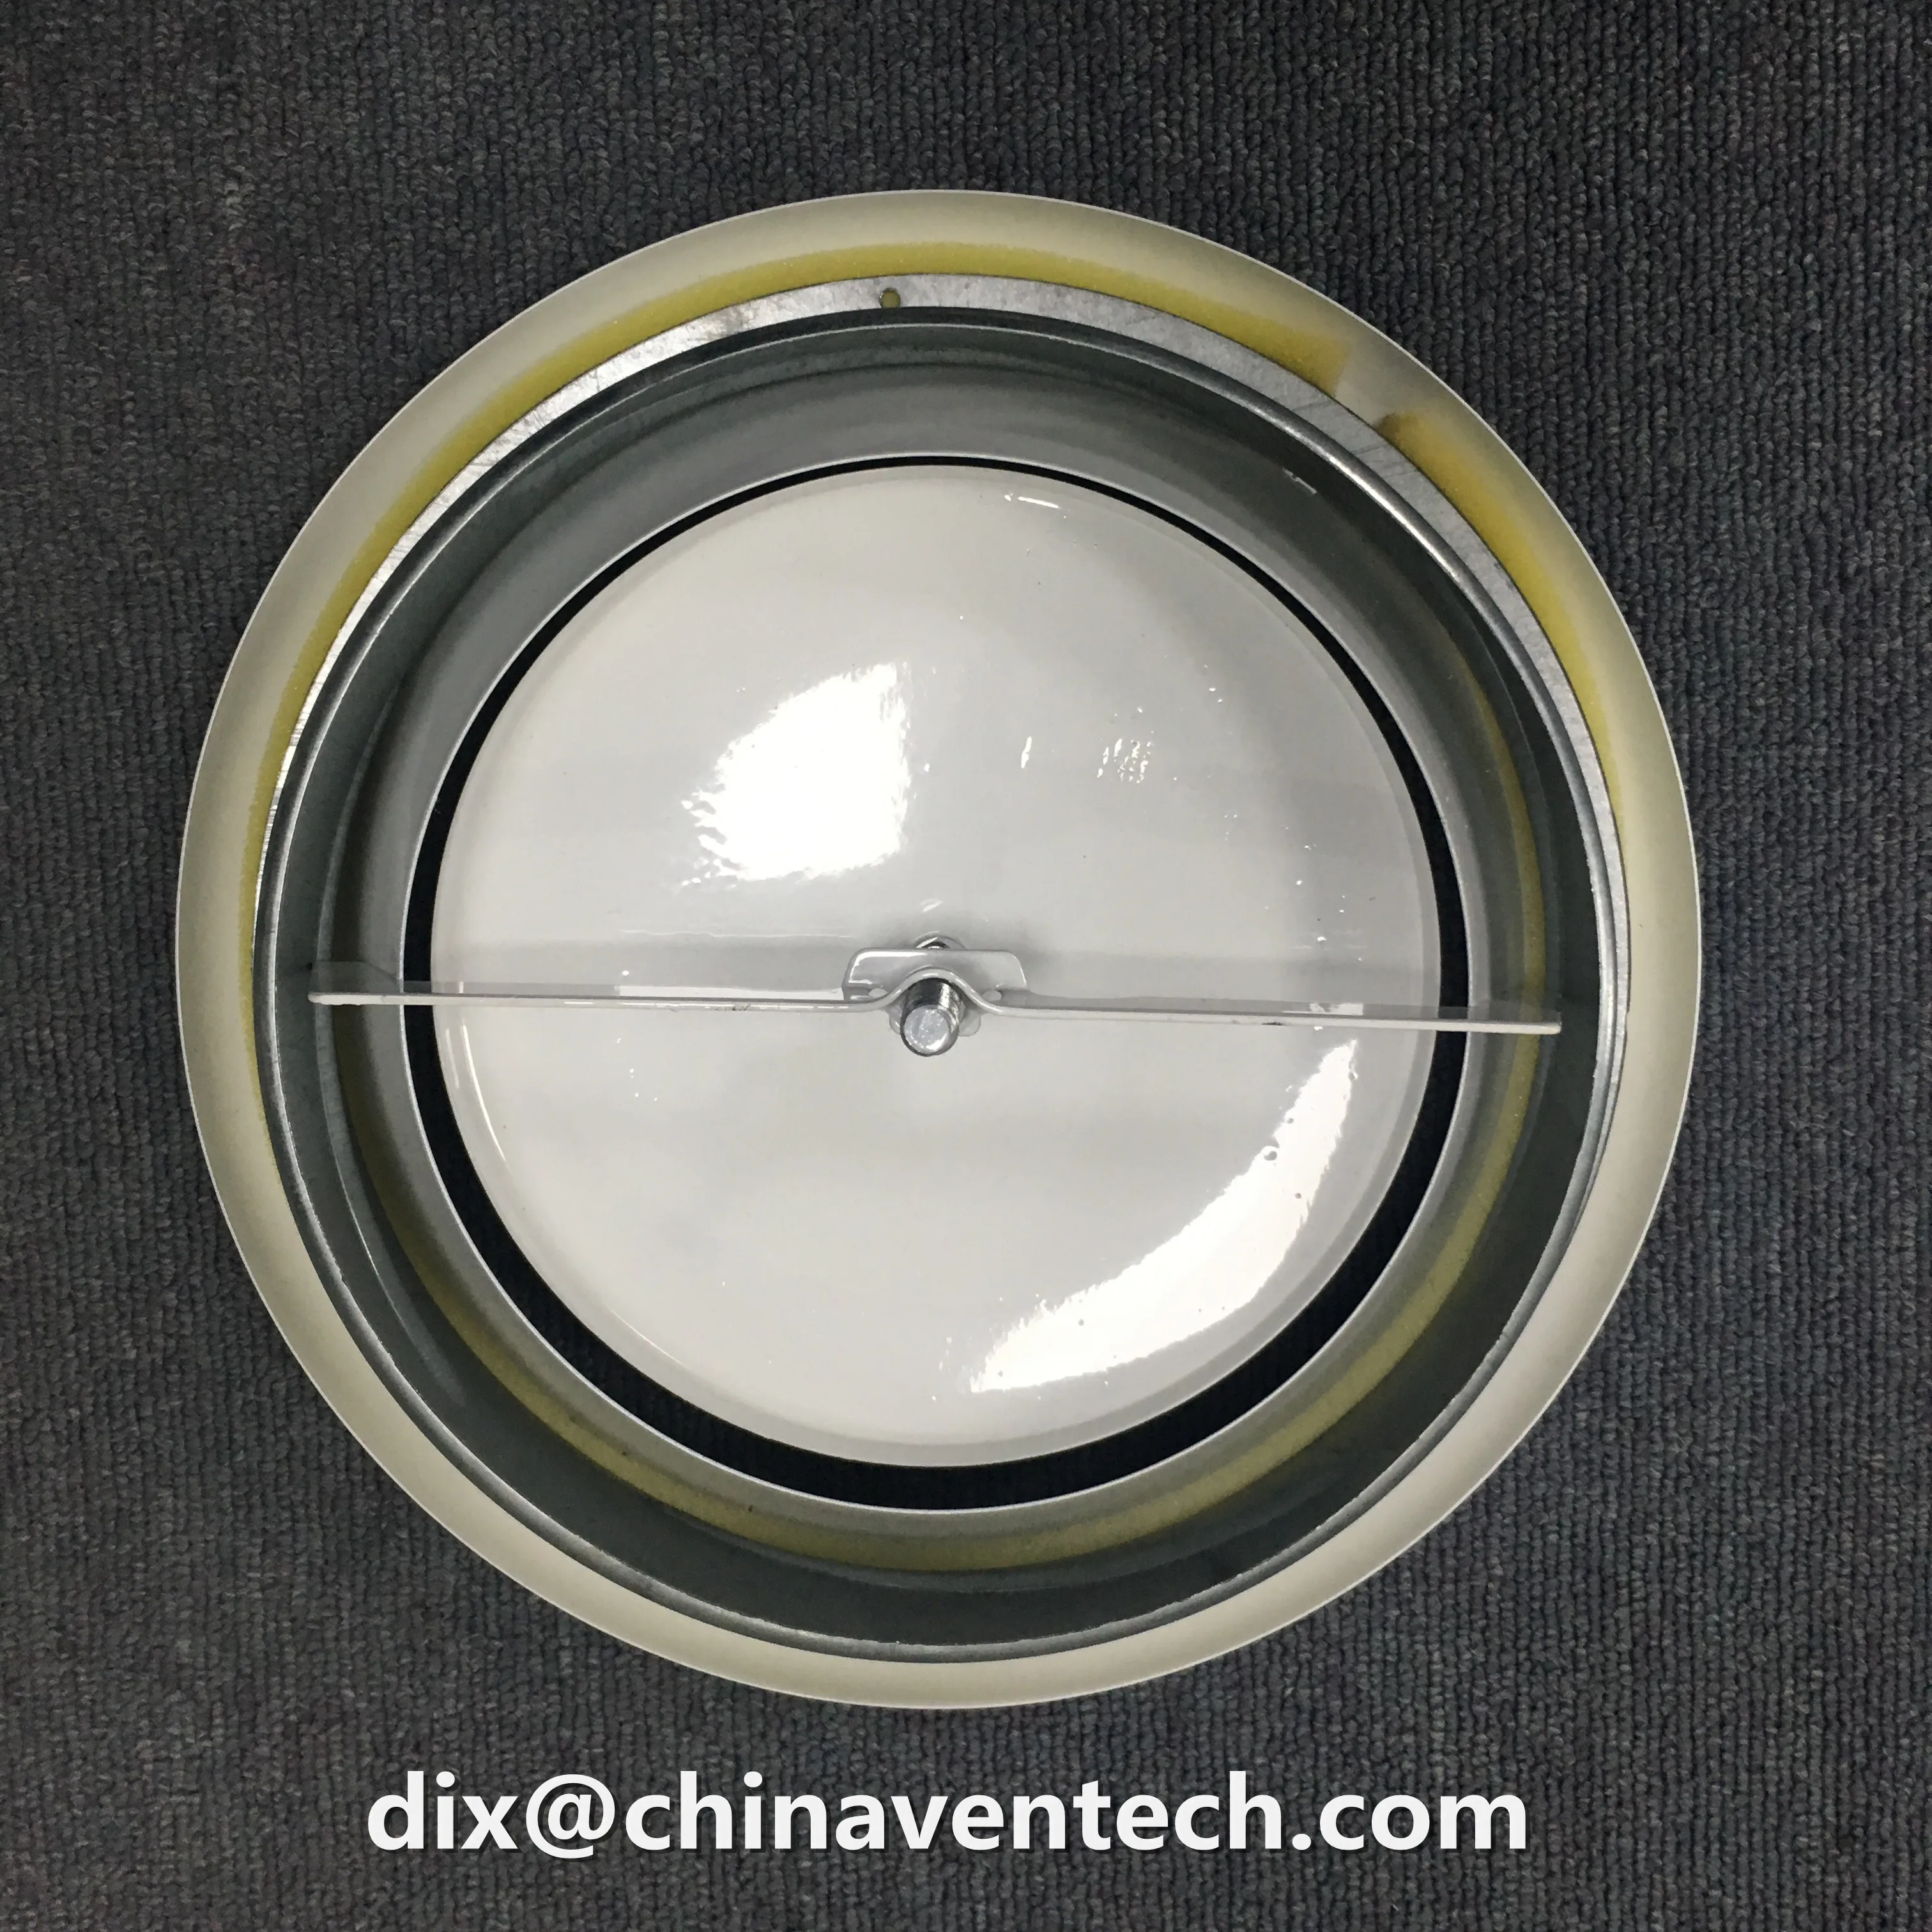 Hvac ceiling ducts ventilation supply air vent round disc valve diffusers